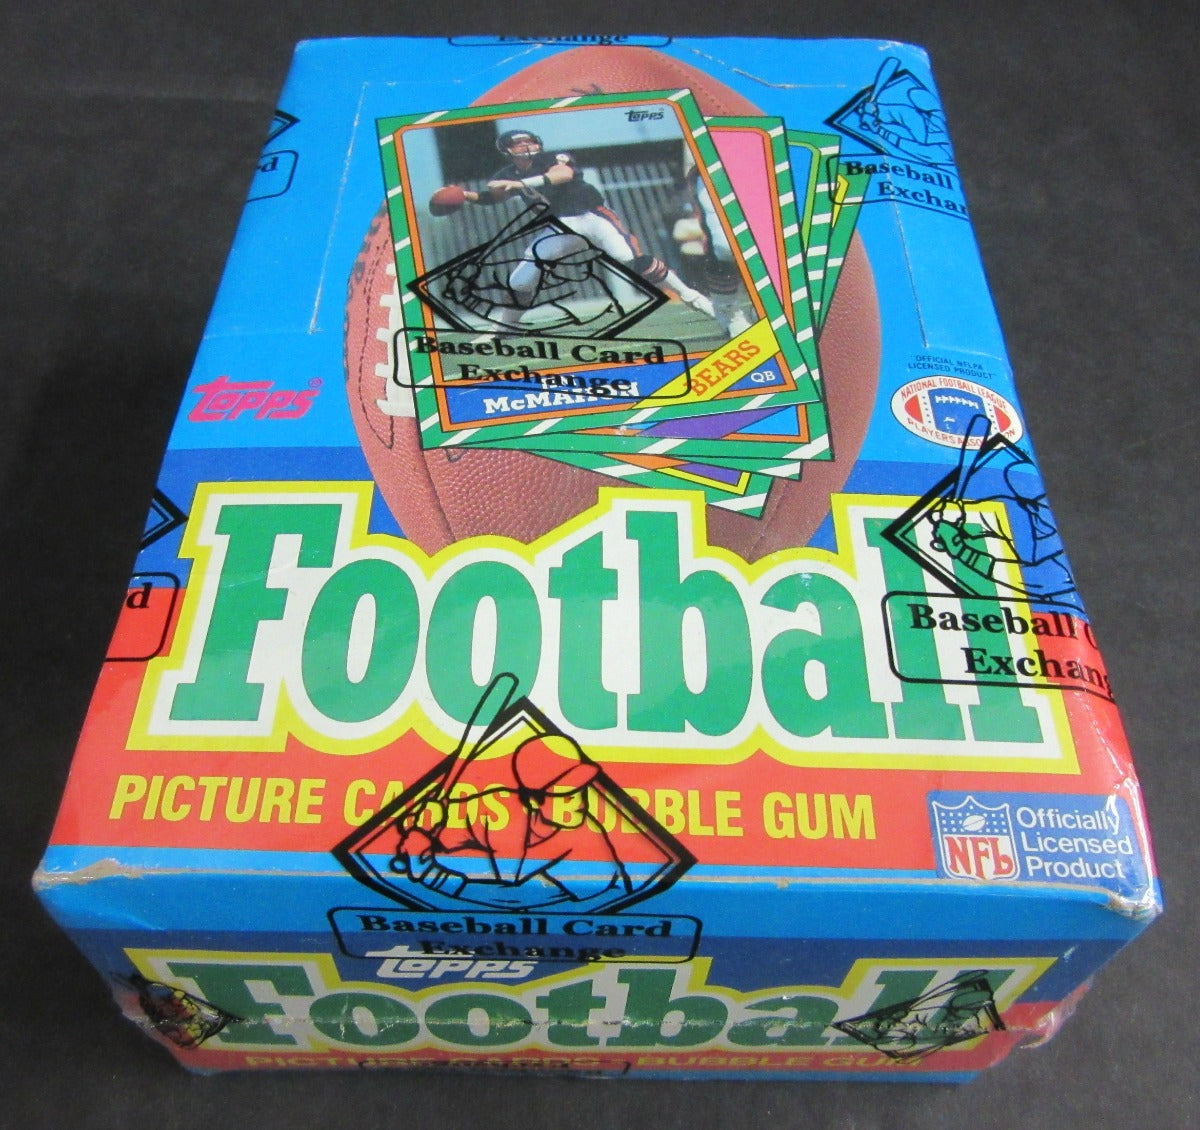 1986 Topps Football Unopened Wax Box (BBCE) (Non X-Out)